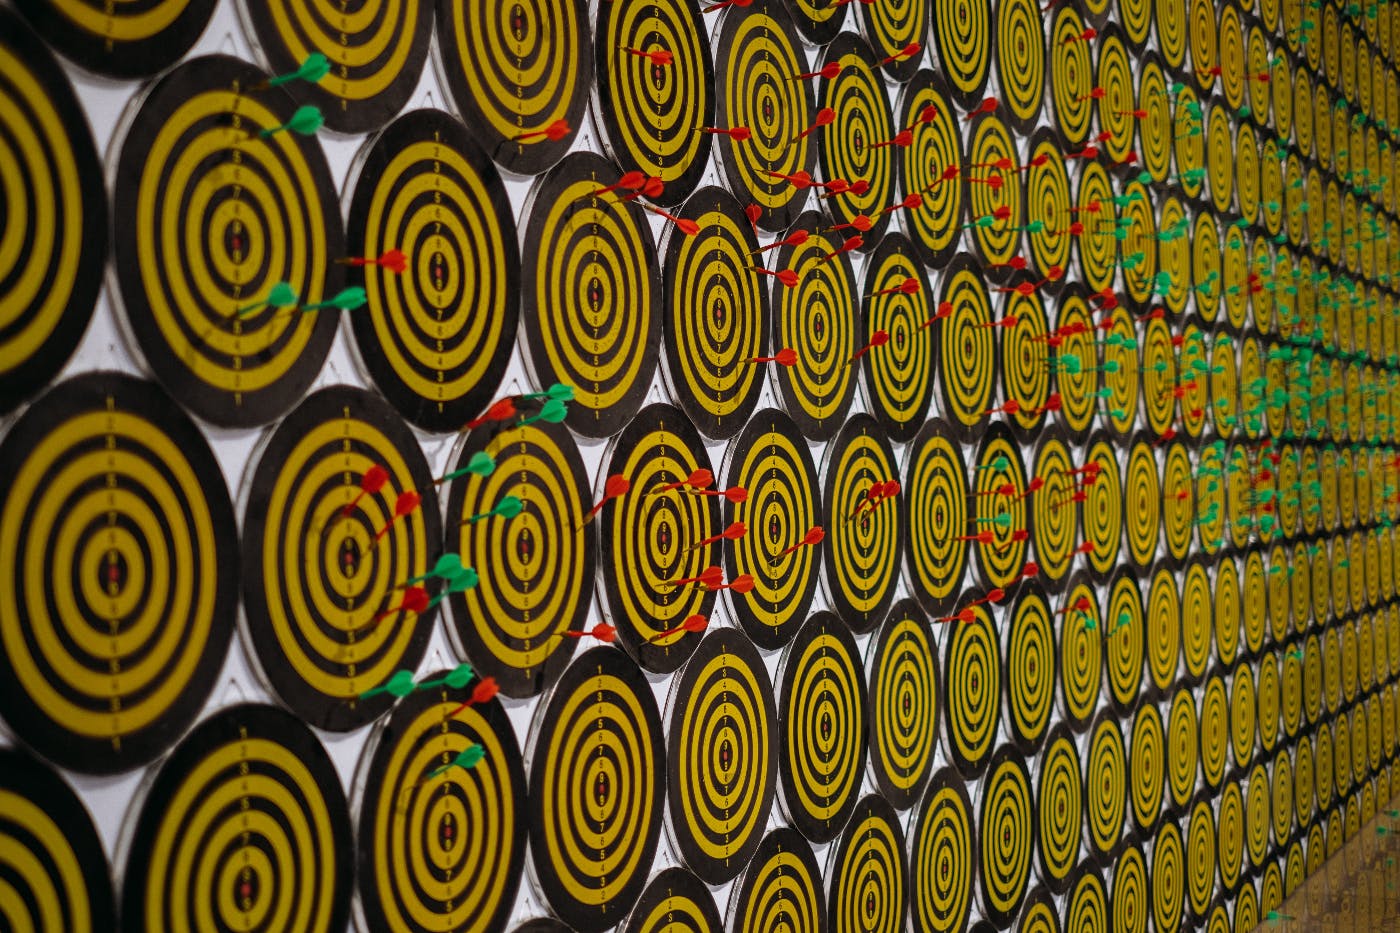 A wall with hundreds of dart boards with red and green darts in them